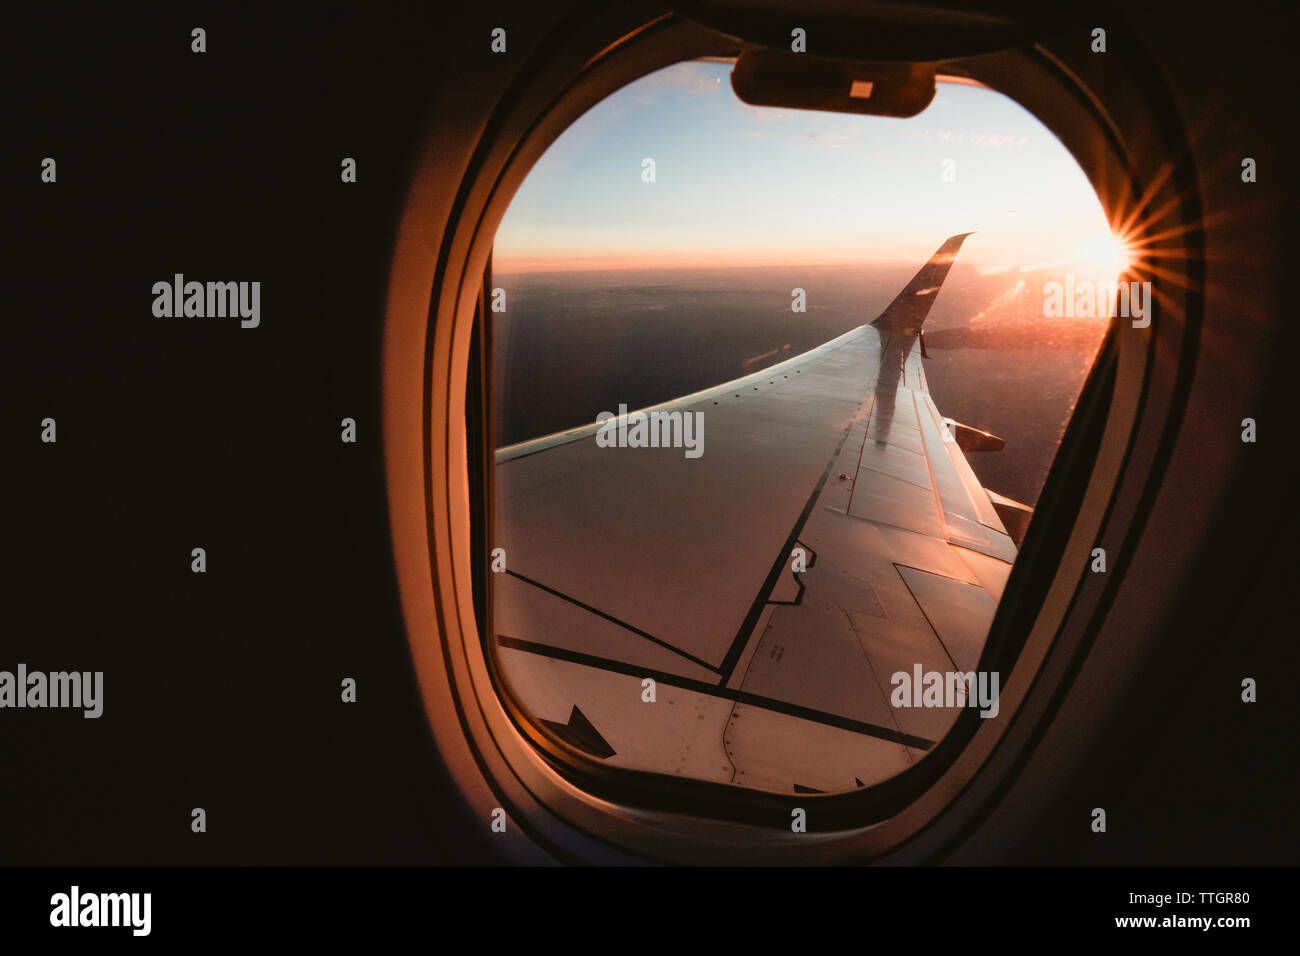 Sunset over California from the window seat of a plane with a sun star Stock Photo